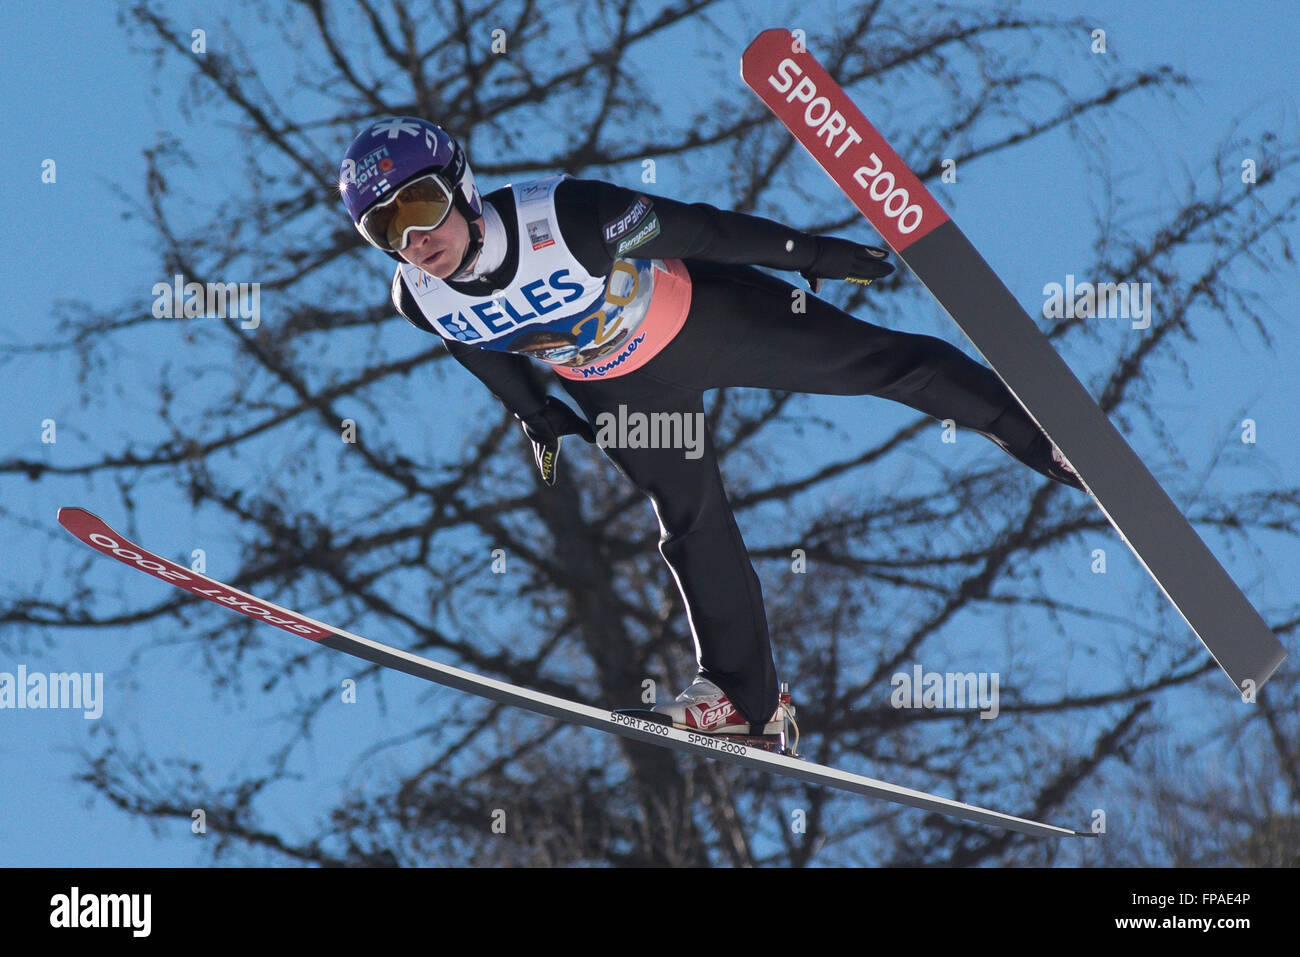 Planica, Slovenia. 18th Mar, 2016. Ville Larinto of Finland competes during Planica FIS Ski Jumping World Cup finals on the March 18, 2016 in Planica, Slovenia. © Rok Rakun/Pacific Press/Alamy Live News Stock Photo